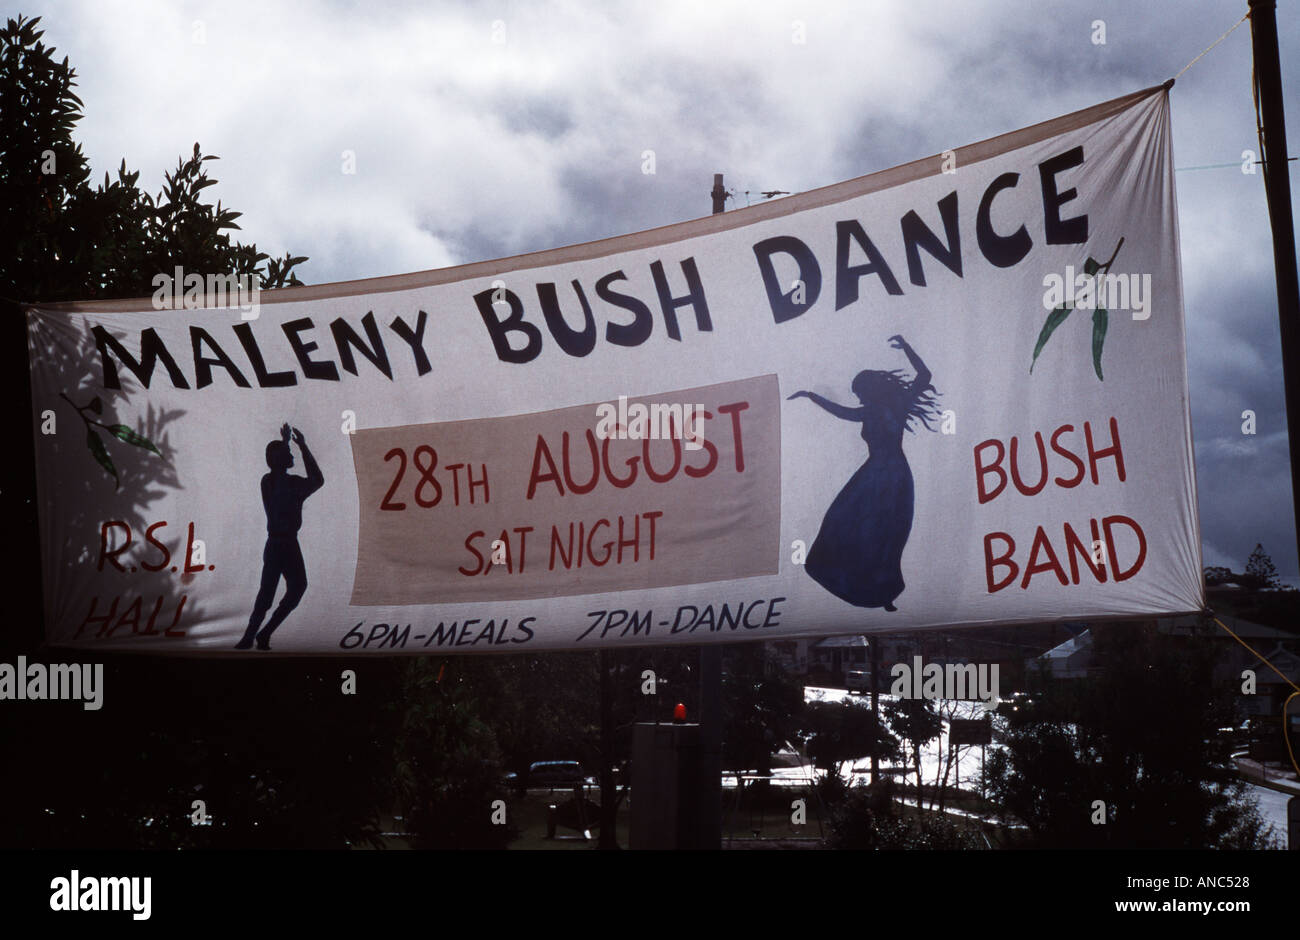 Banner advertising the Bush Dance in the town of Maleny Queensland Australia Stock Photo